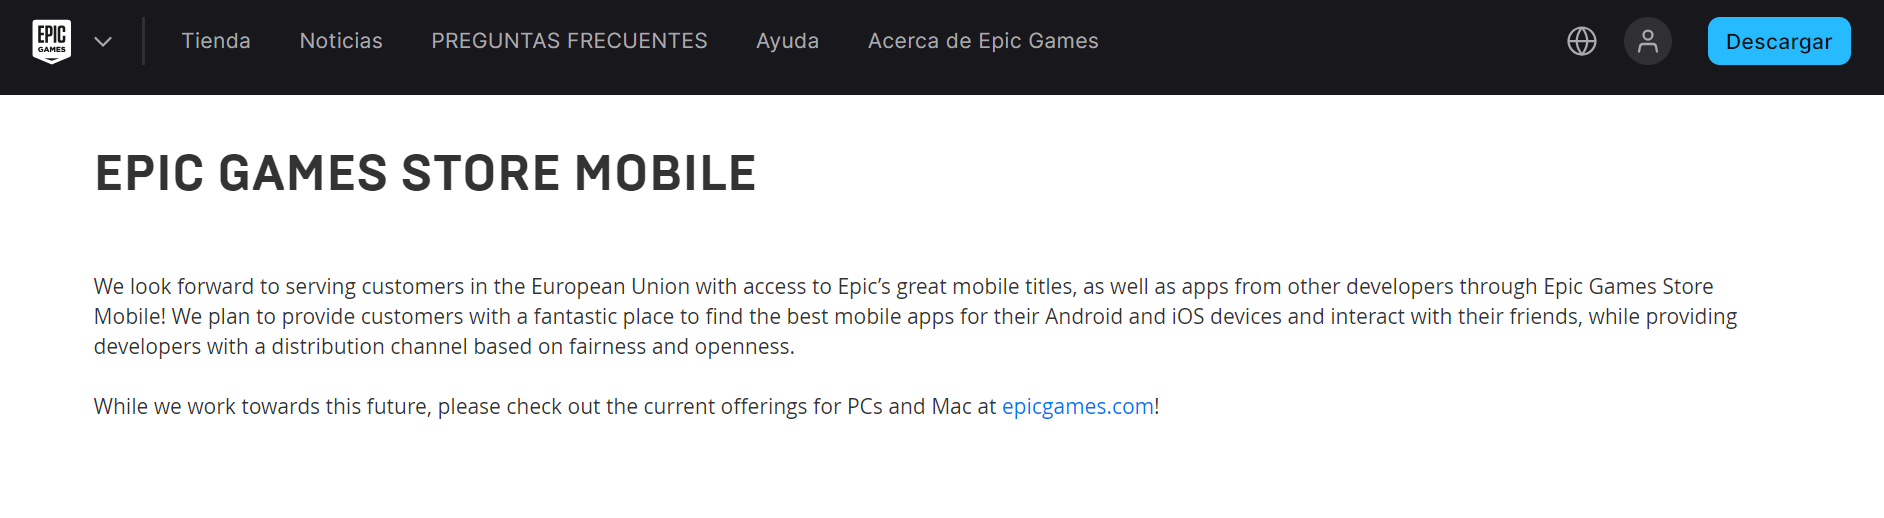 Epic Game Store Mobile для Android